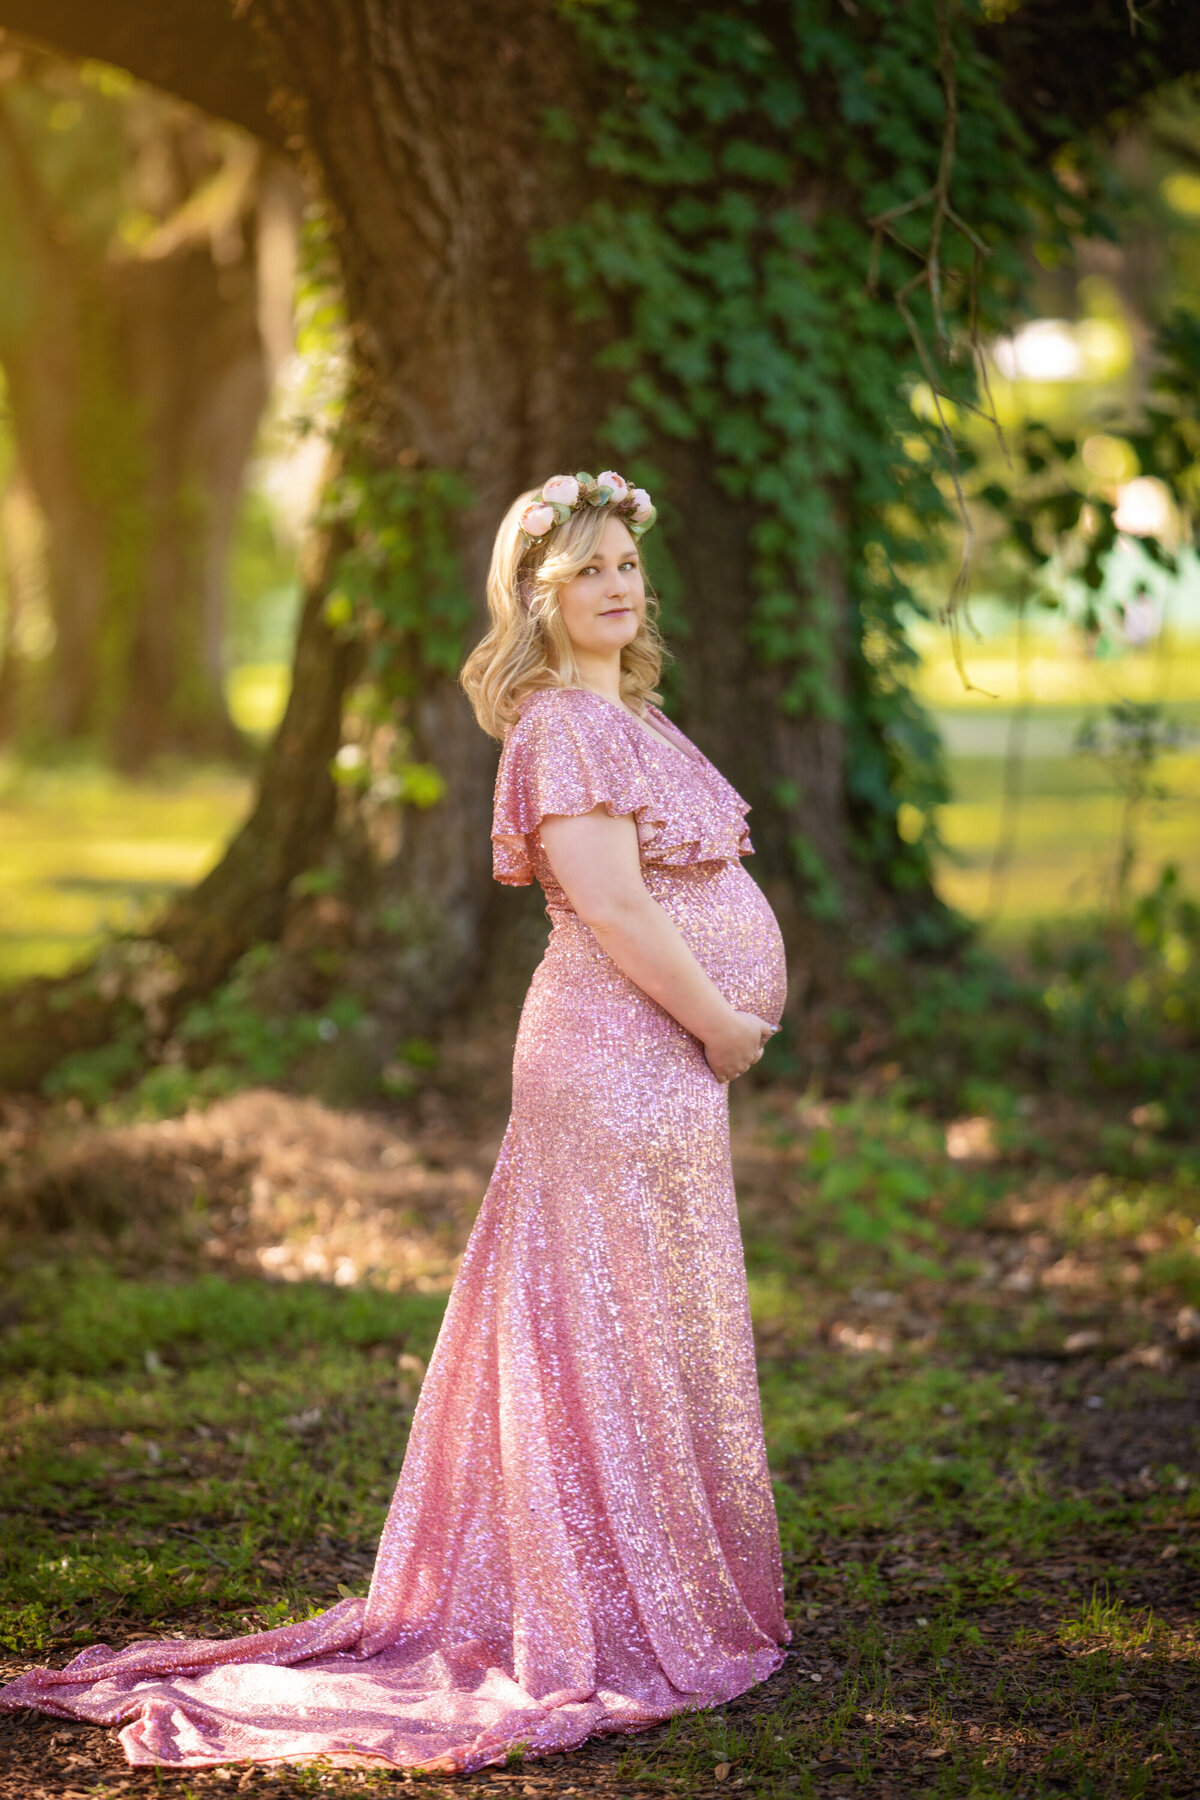 Blond woman with shoulder length hair and a pink floral crown stands in Audubon Park under a live oak tree.  She is pregnant with twins and is holding her belly.  She is wearing a pink sequined dress by Mii-Estillo with a long long train behind her.